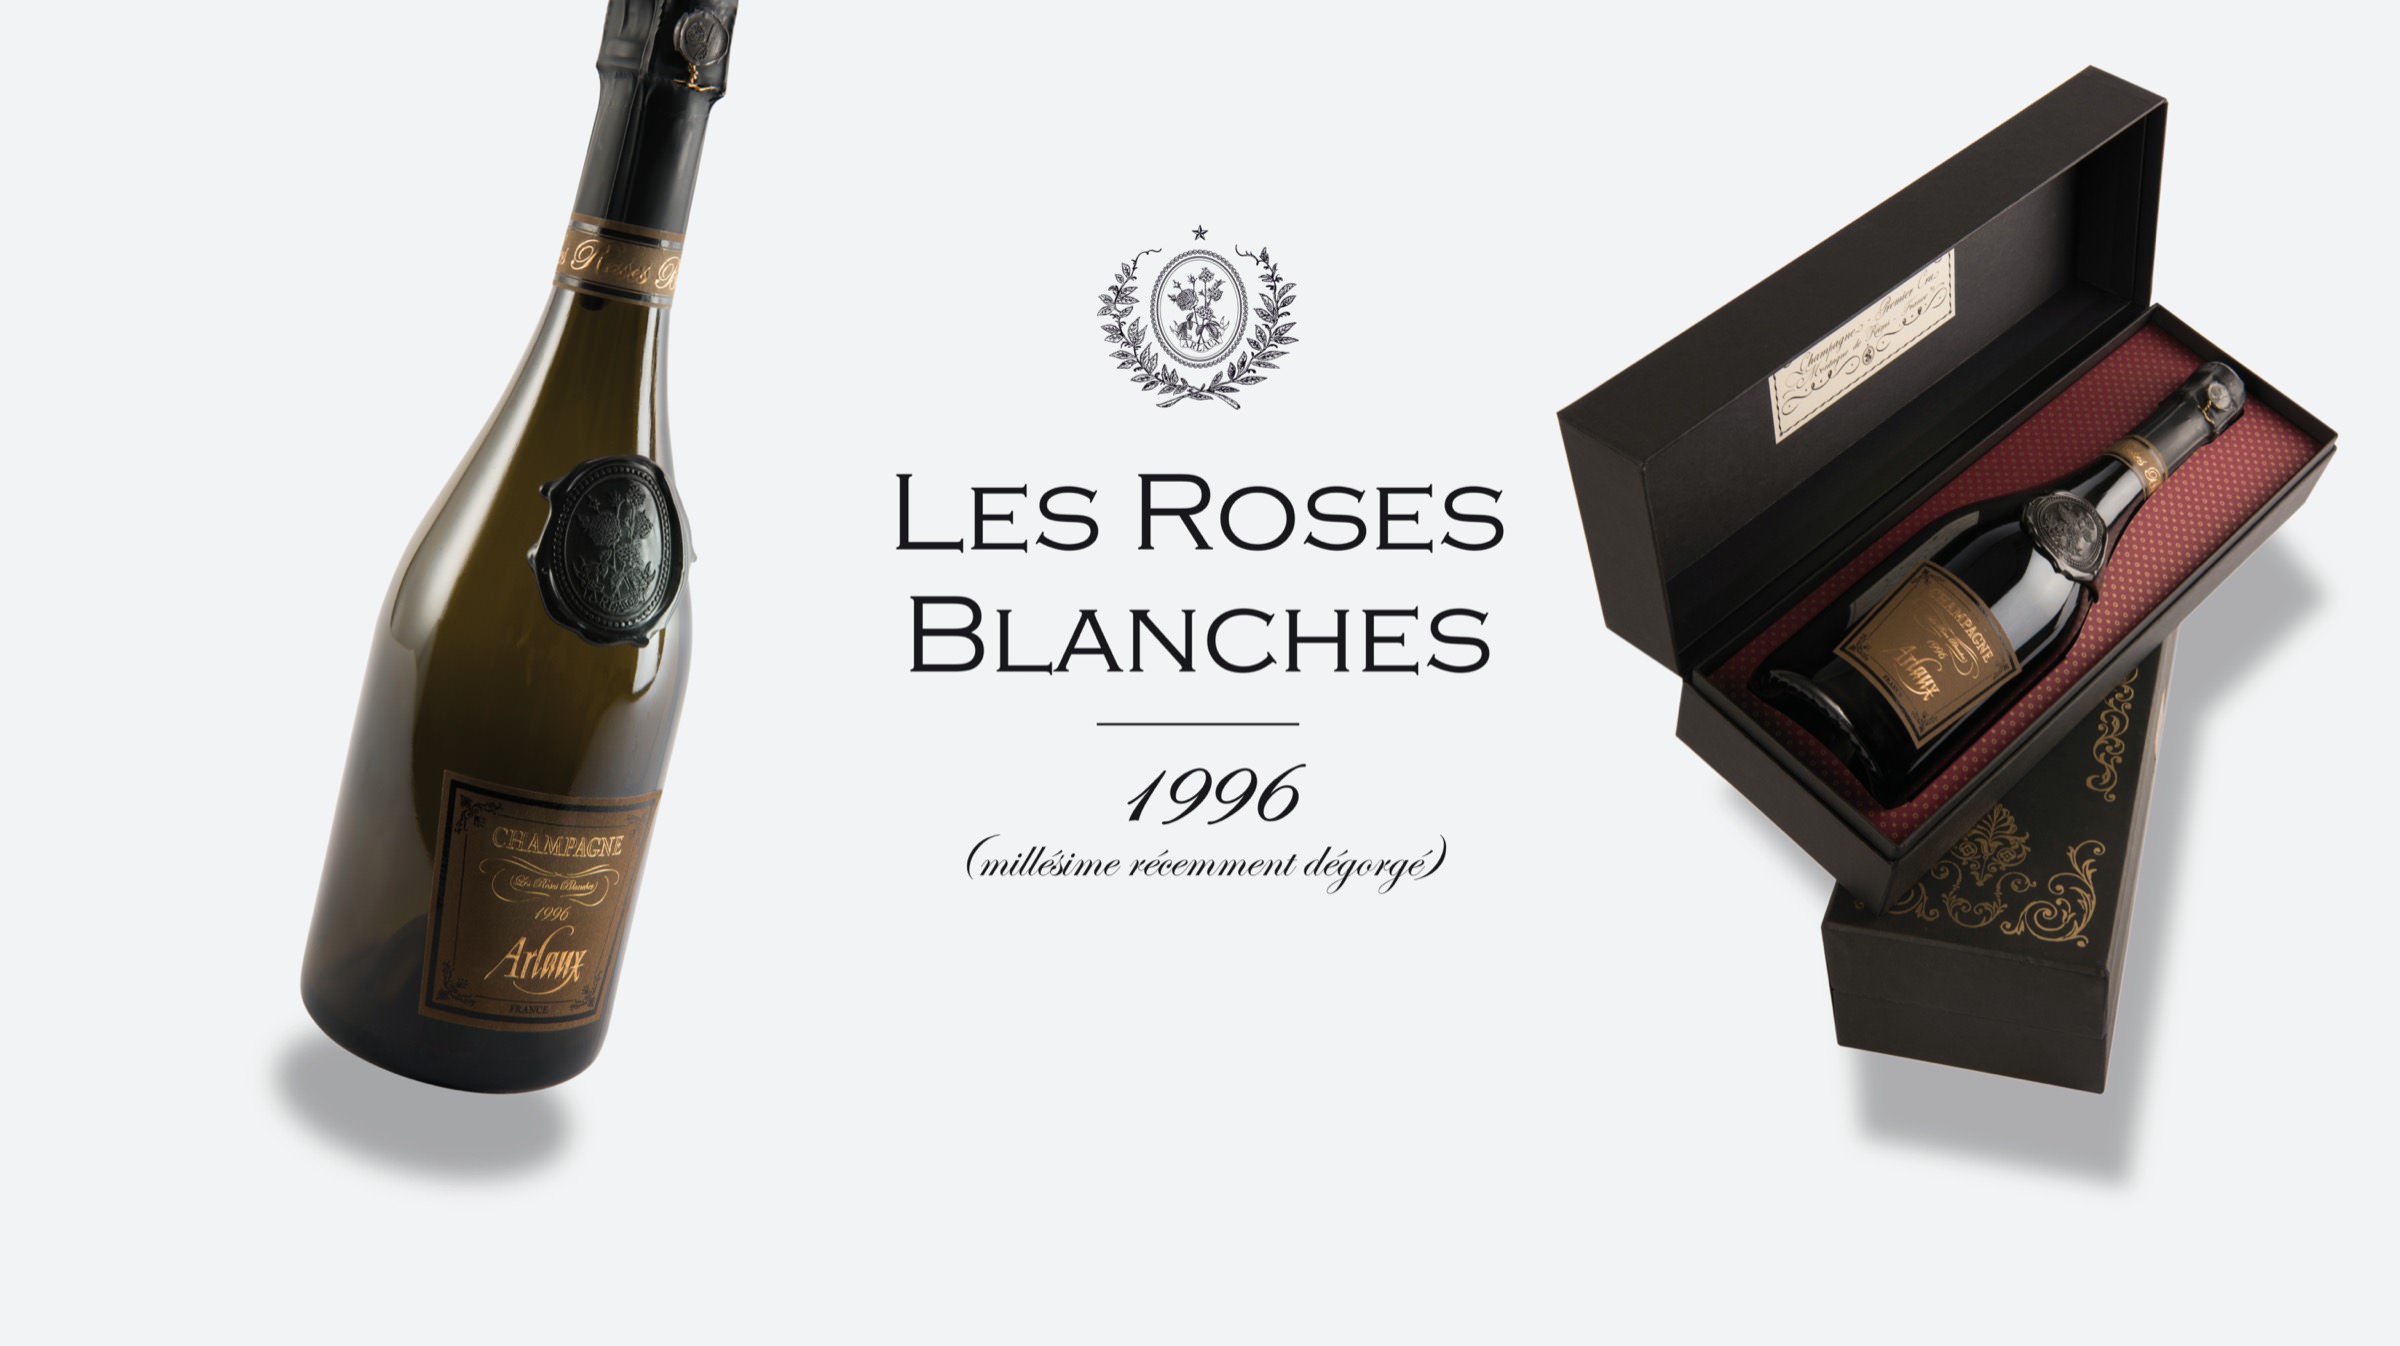 Les roses blanches - Arlaux Champagne